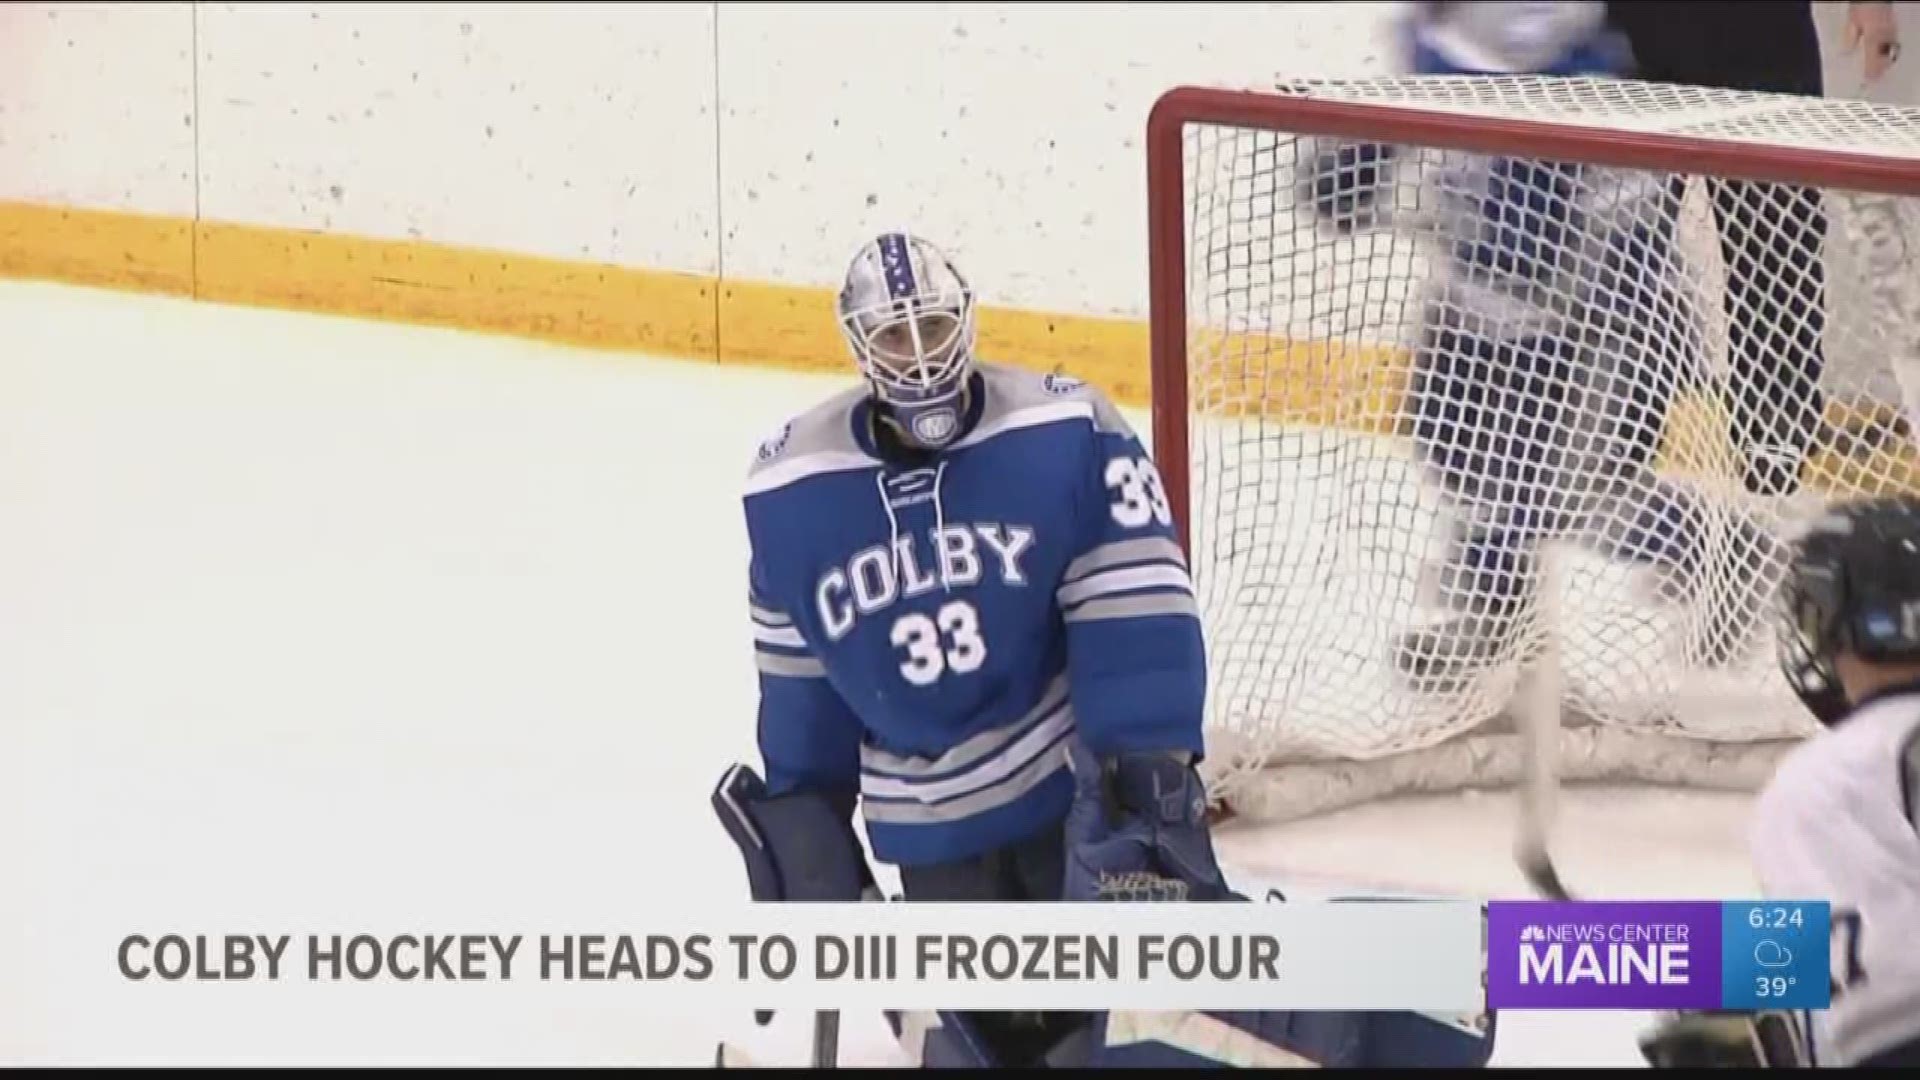 Colby Hockey's journey to the Frozen Four